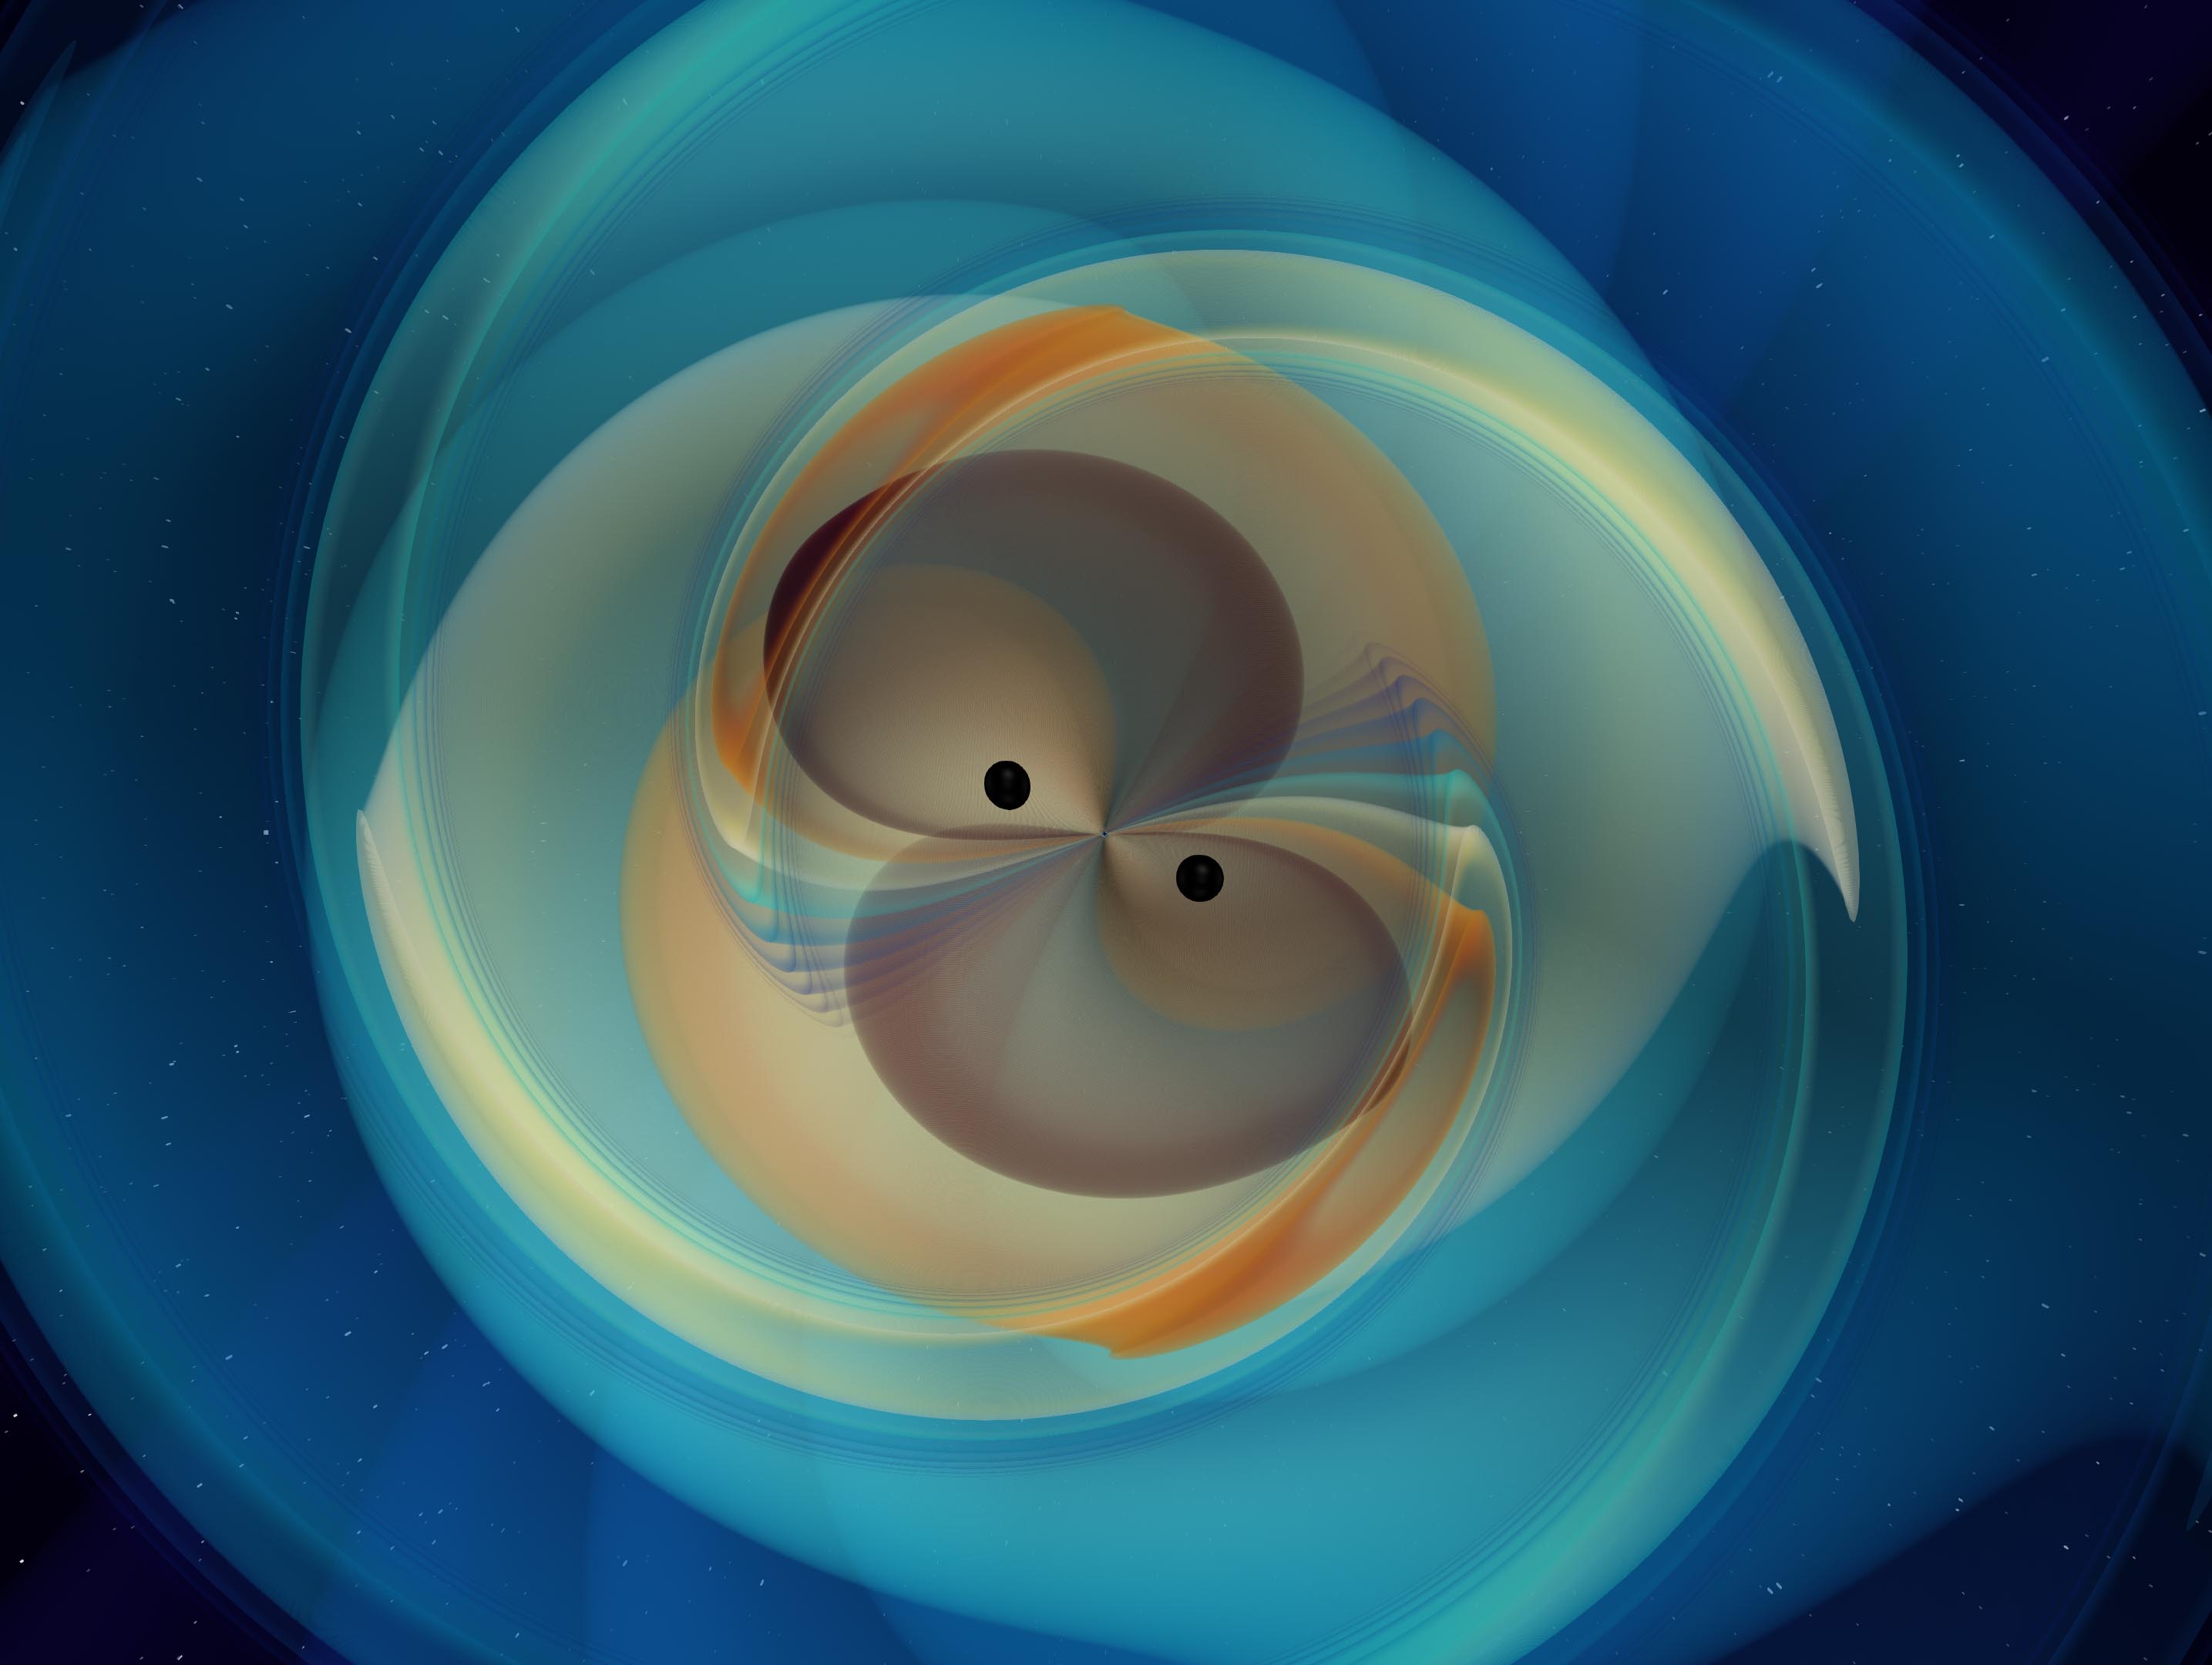 Numerical simulation of two black holes that spiral inwards and merge, emitting gravitational waves. The simulated gravitational wave signal is consistent with the observation made by the LIGO and Virgo gravitational wave detectors on May 21st, 2019 (GW190521). Image Copyright © N. Fischer, H. Pfeiffer, A. Buonanno (Max Planck Institute for Gravitational Physics), Simulating eXtreme Spacetimes (SXS) Collaboration. (Click image to download hi-res version)